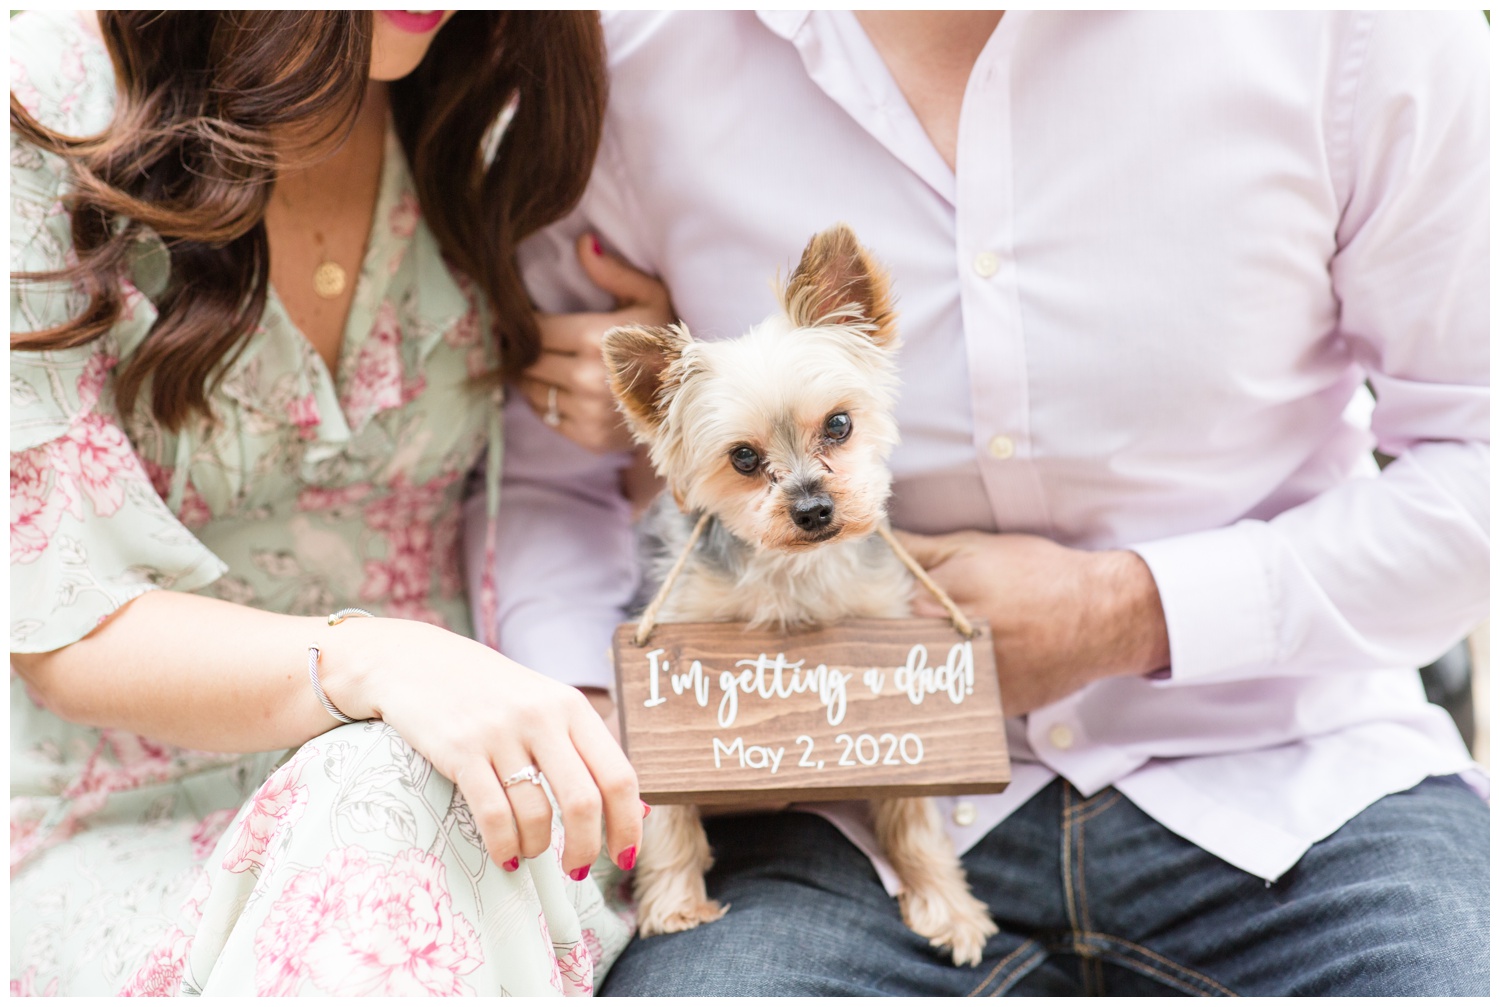 Dog at Engagement Session - Engagement Session with Yorkie